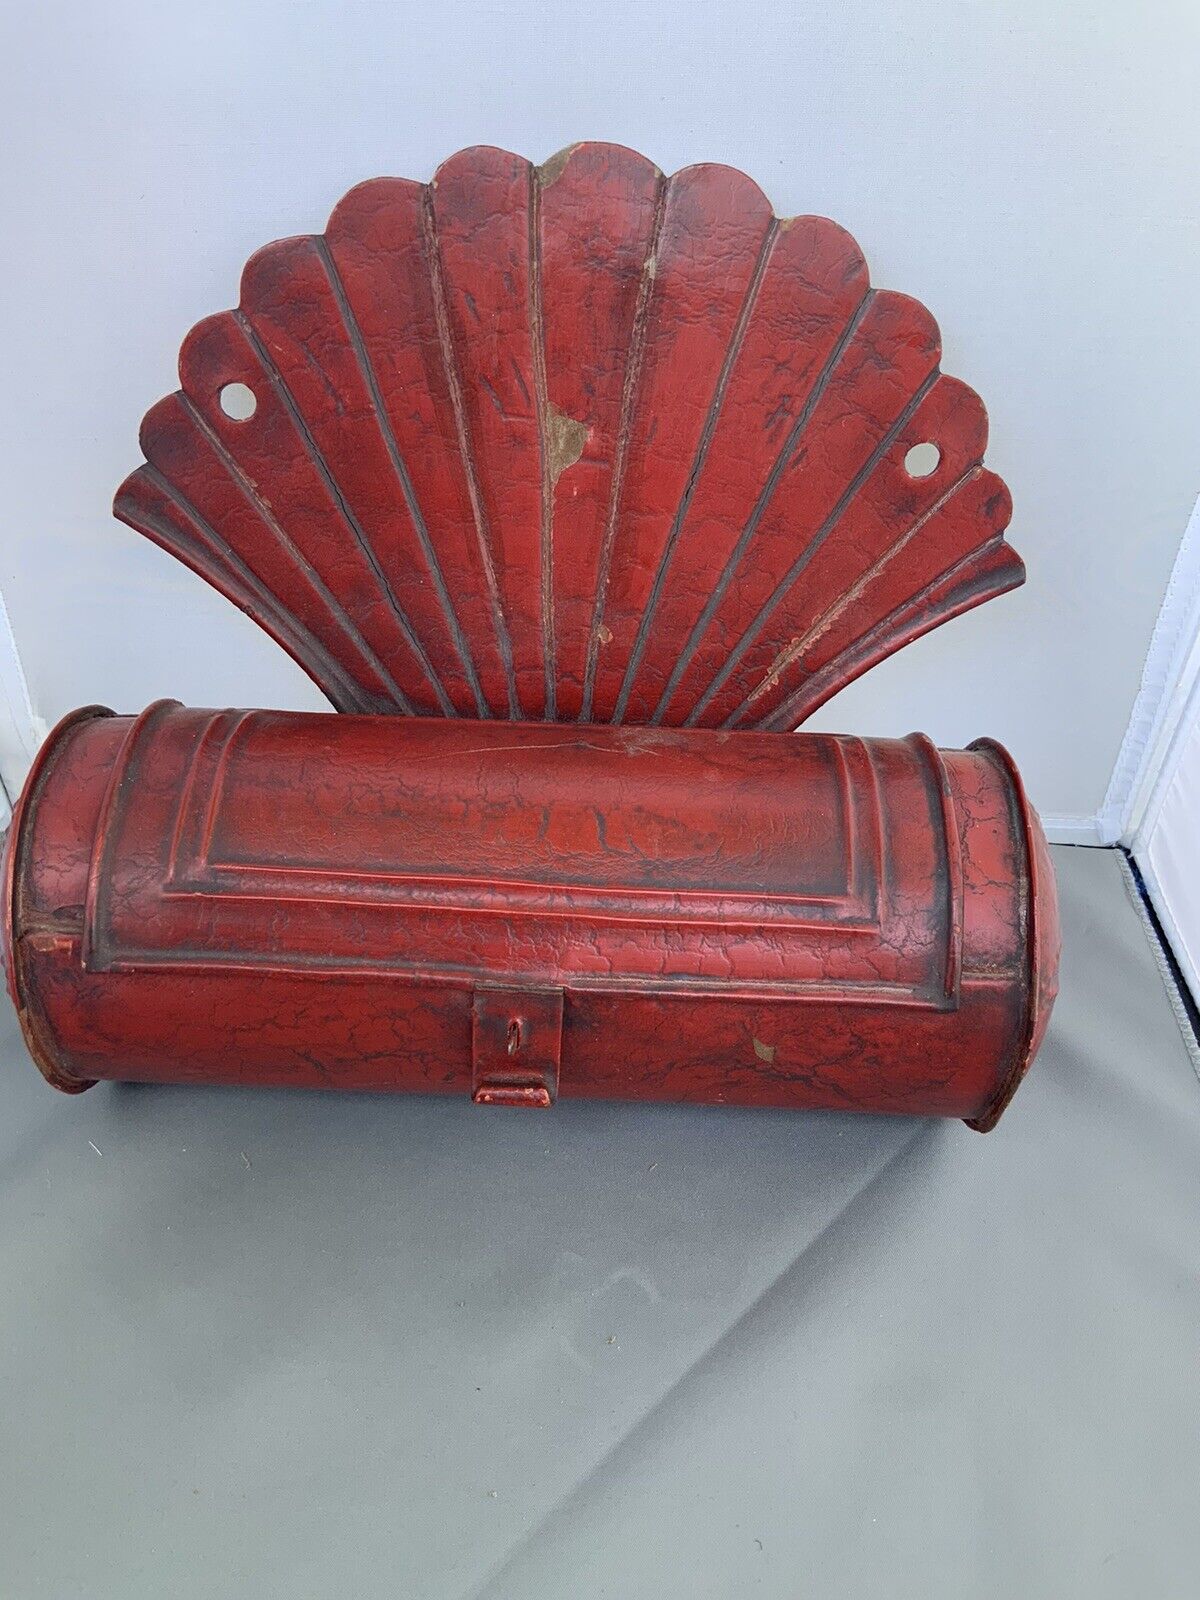 Antique Valuations: Antique Primitive Red Punched Tin Candle Box